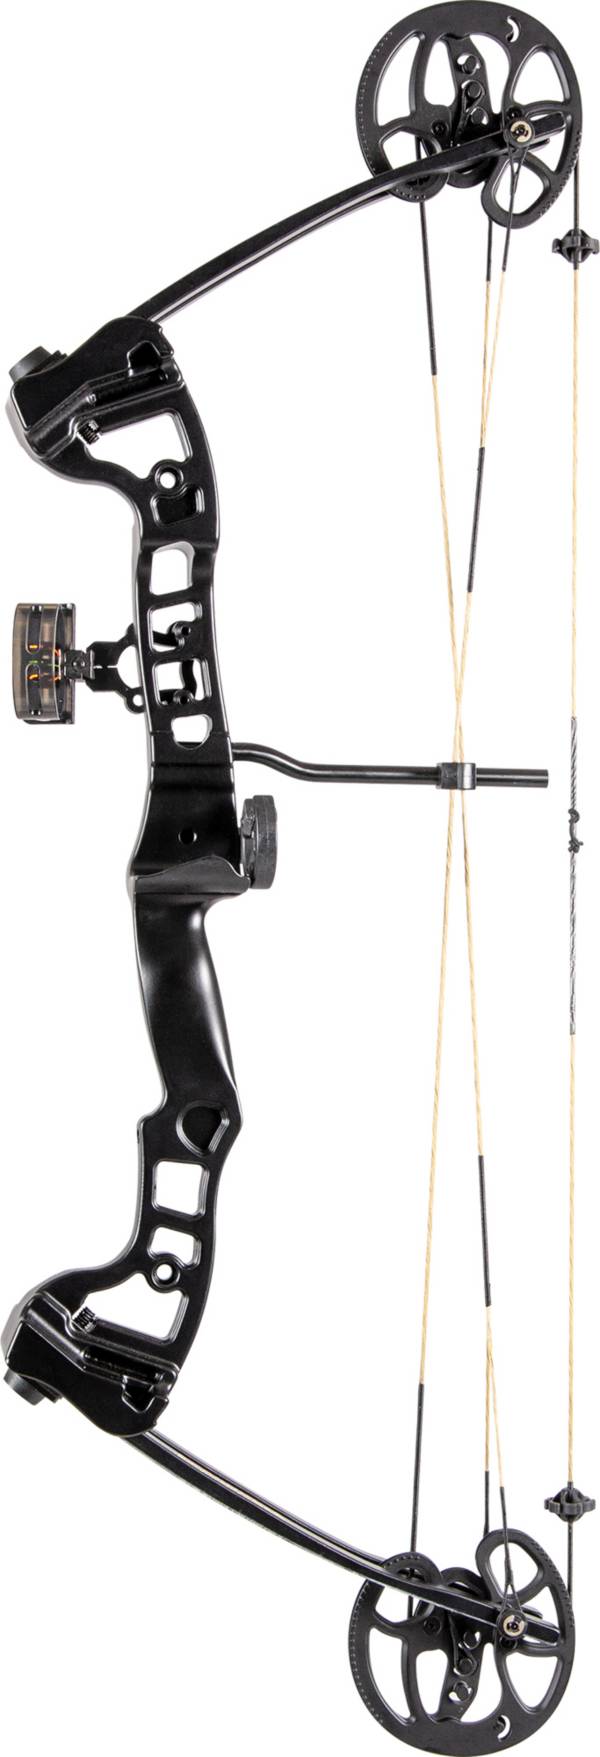 Barnett Vortex Lite Youth Compound Bow Package product image